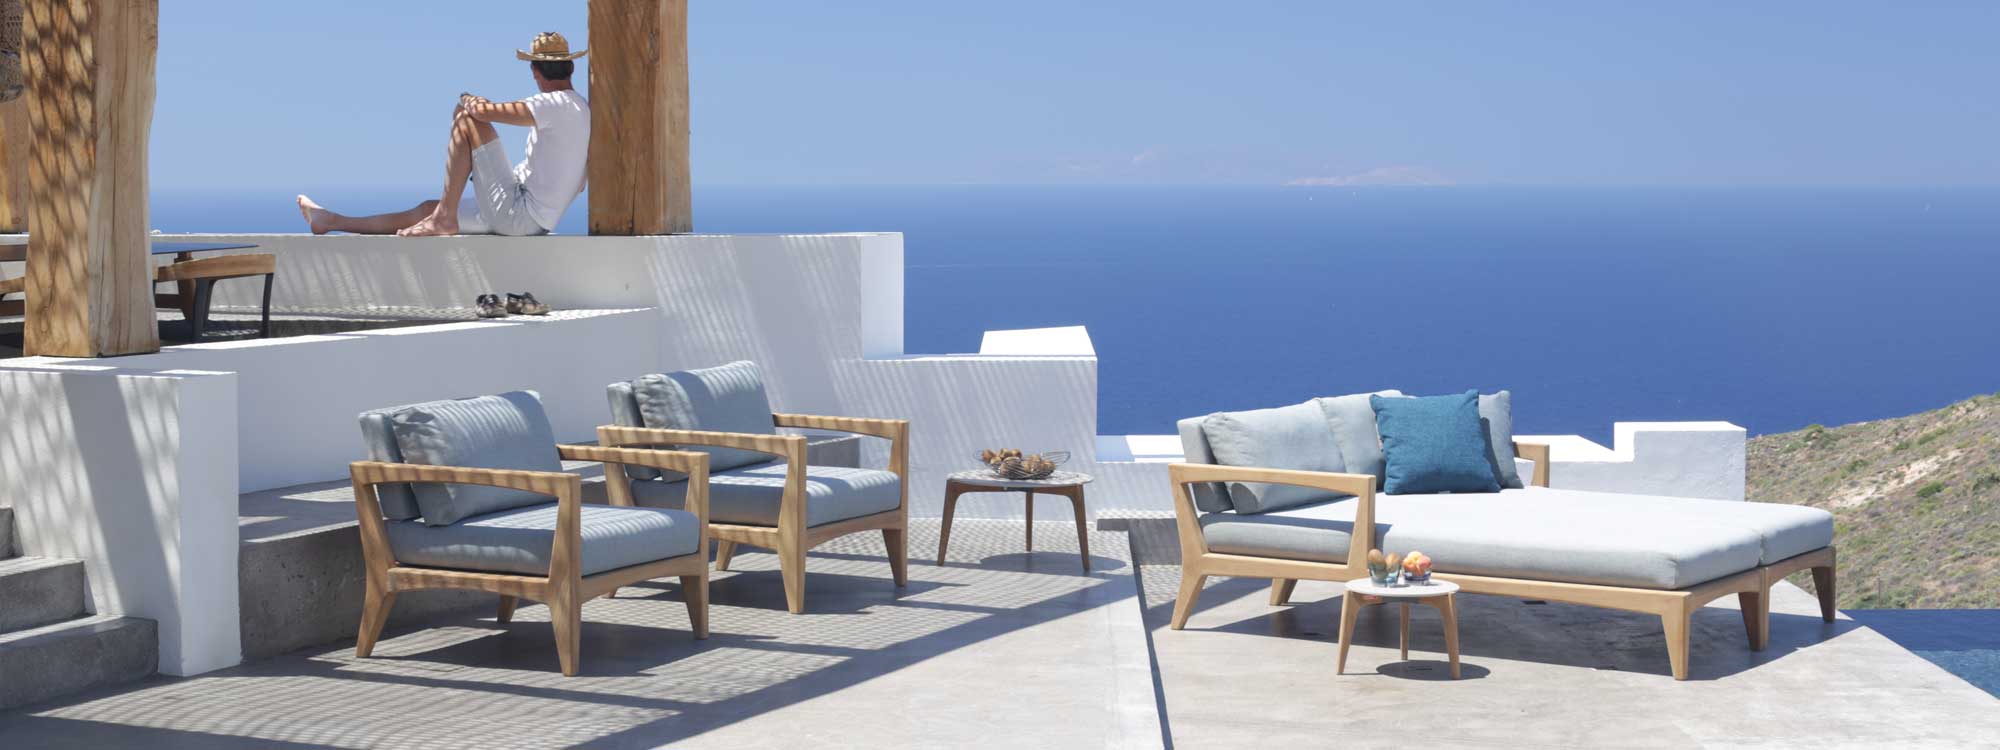 Zenhit teak lounge chairs and daybeds on Greek island terrace overlooking the Mediterranean.